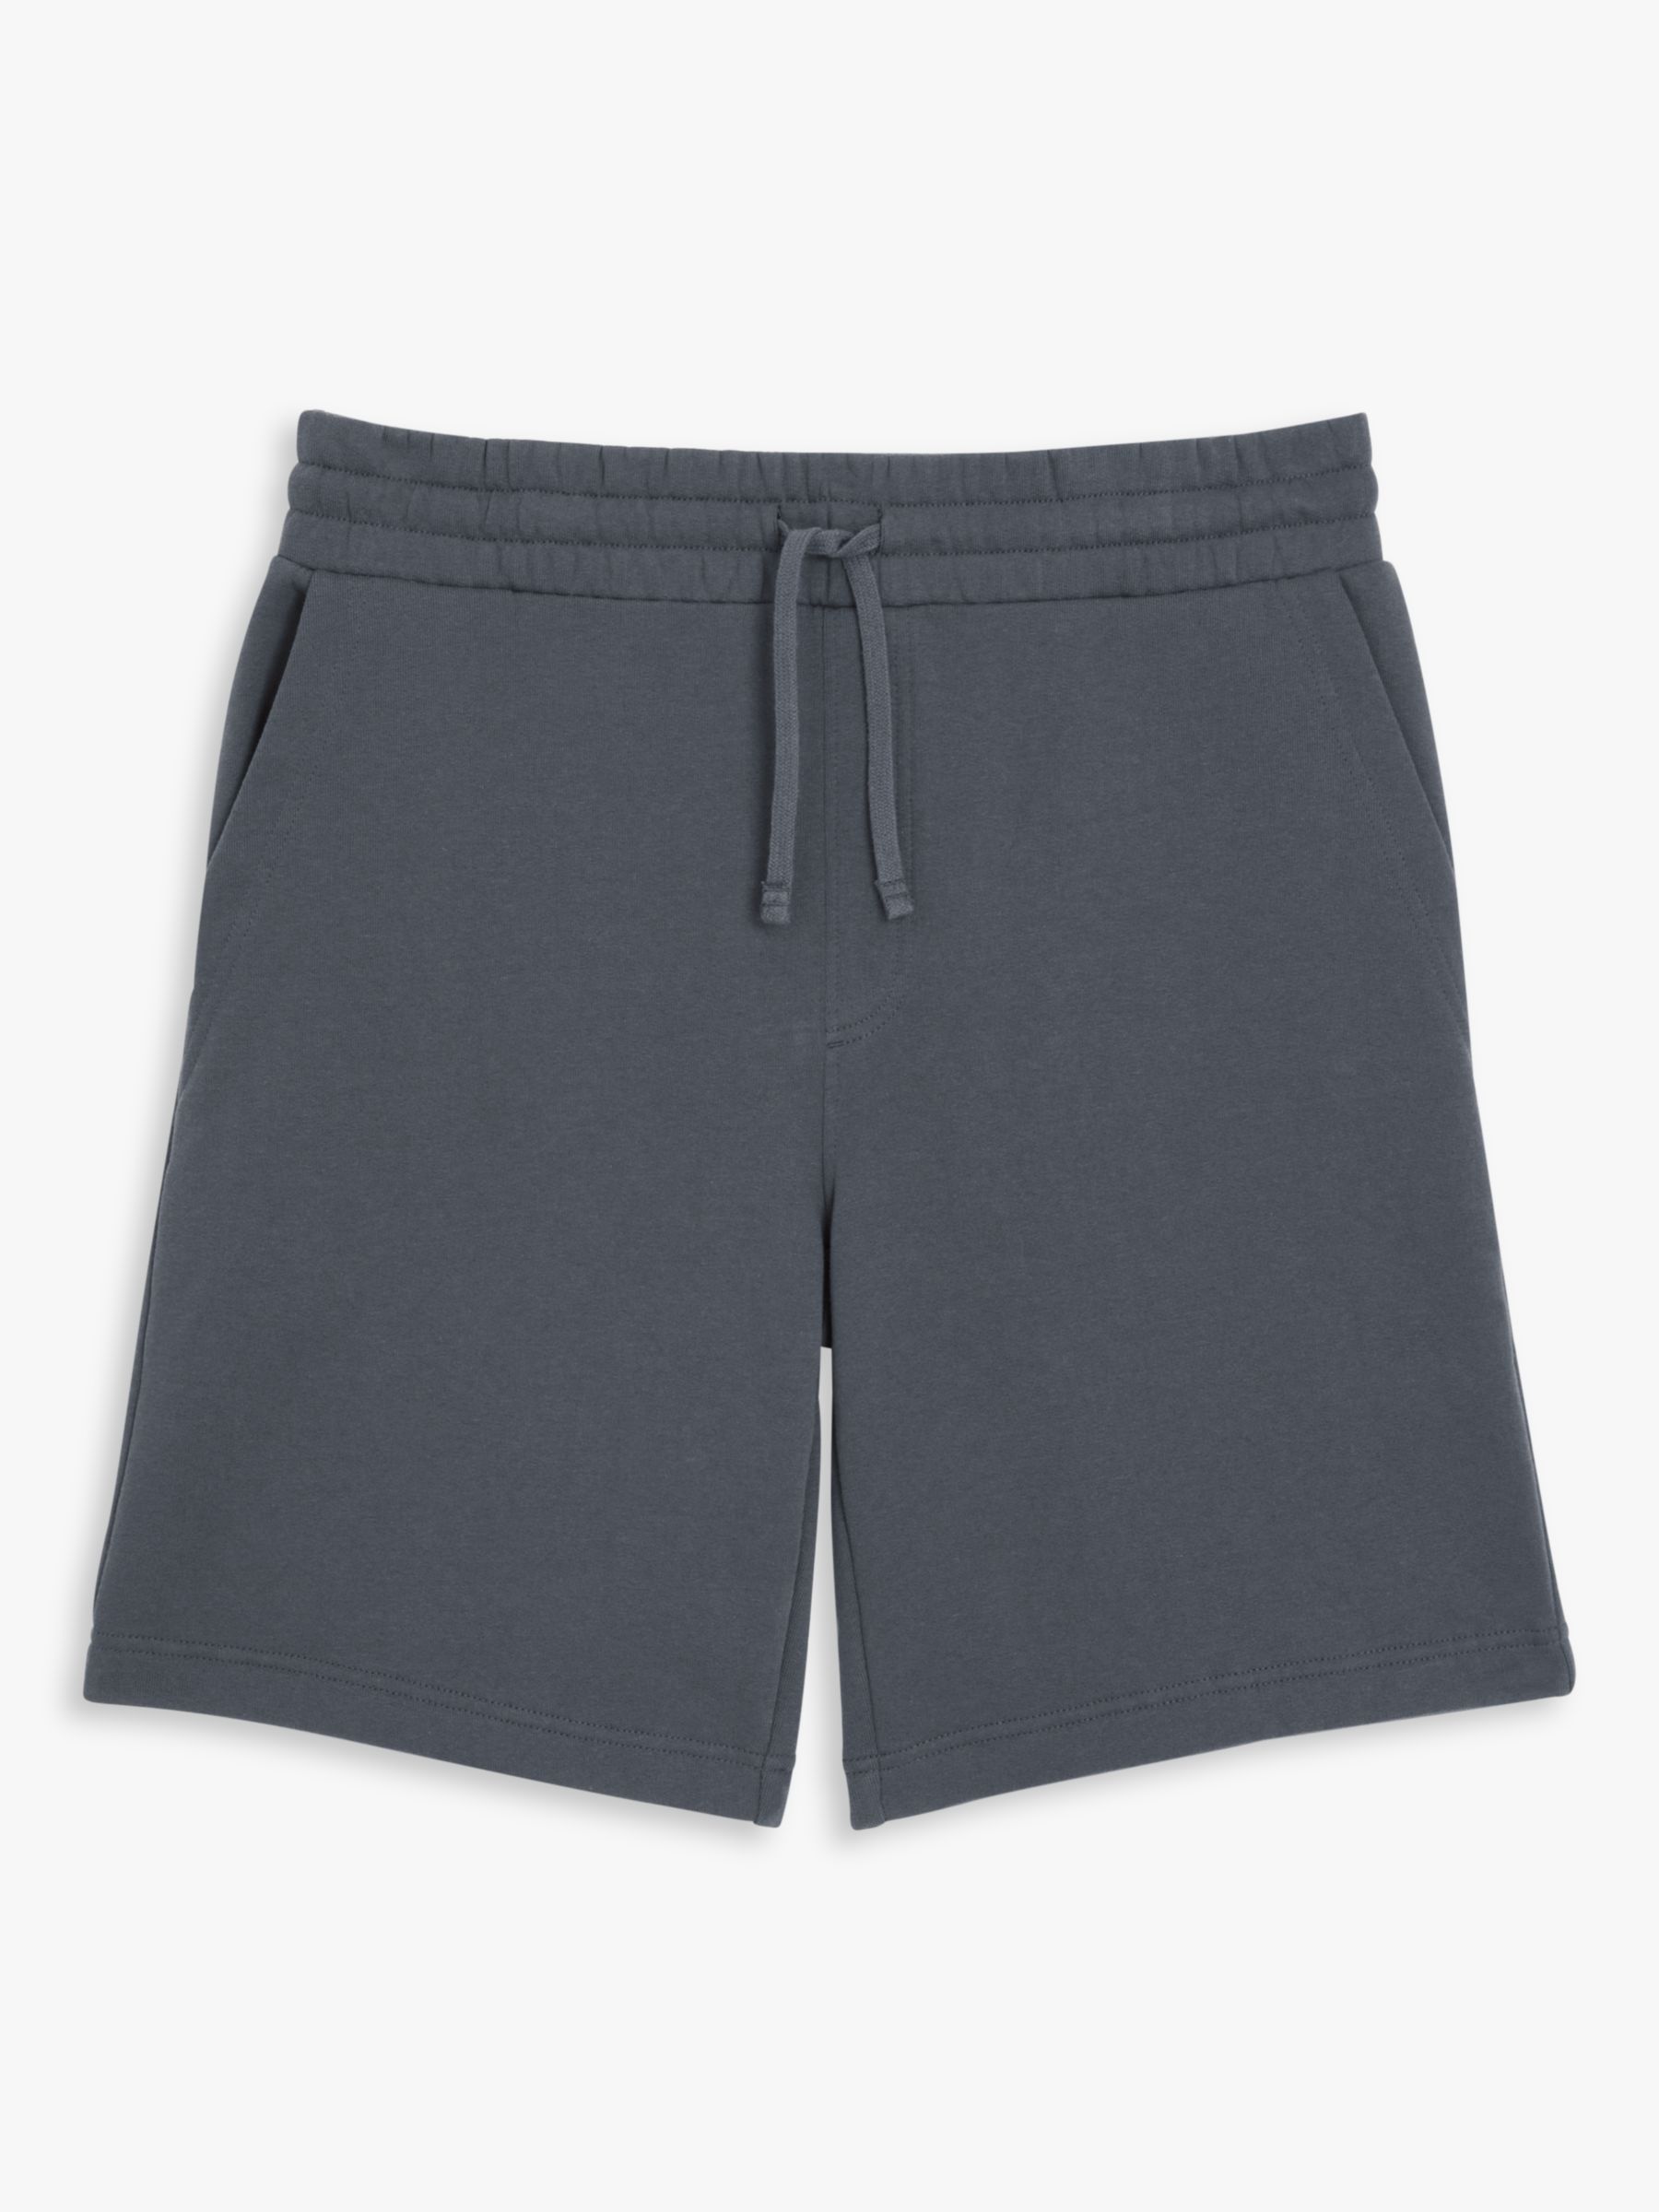 John Lewis ANYDAY Casual Sweat Shorts, Midnight Grey, S